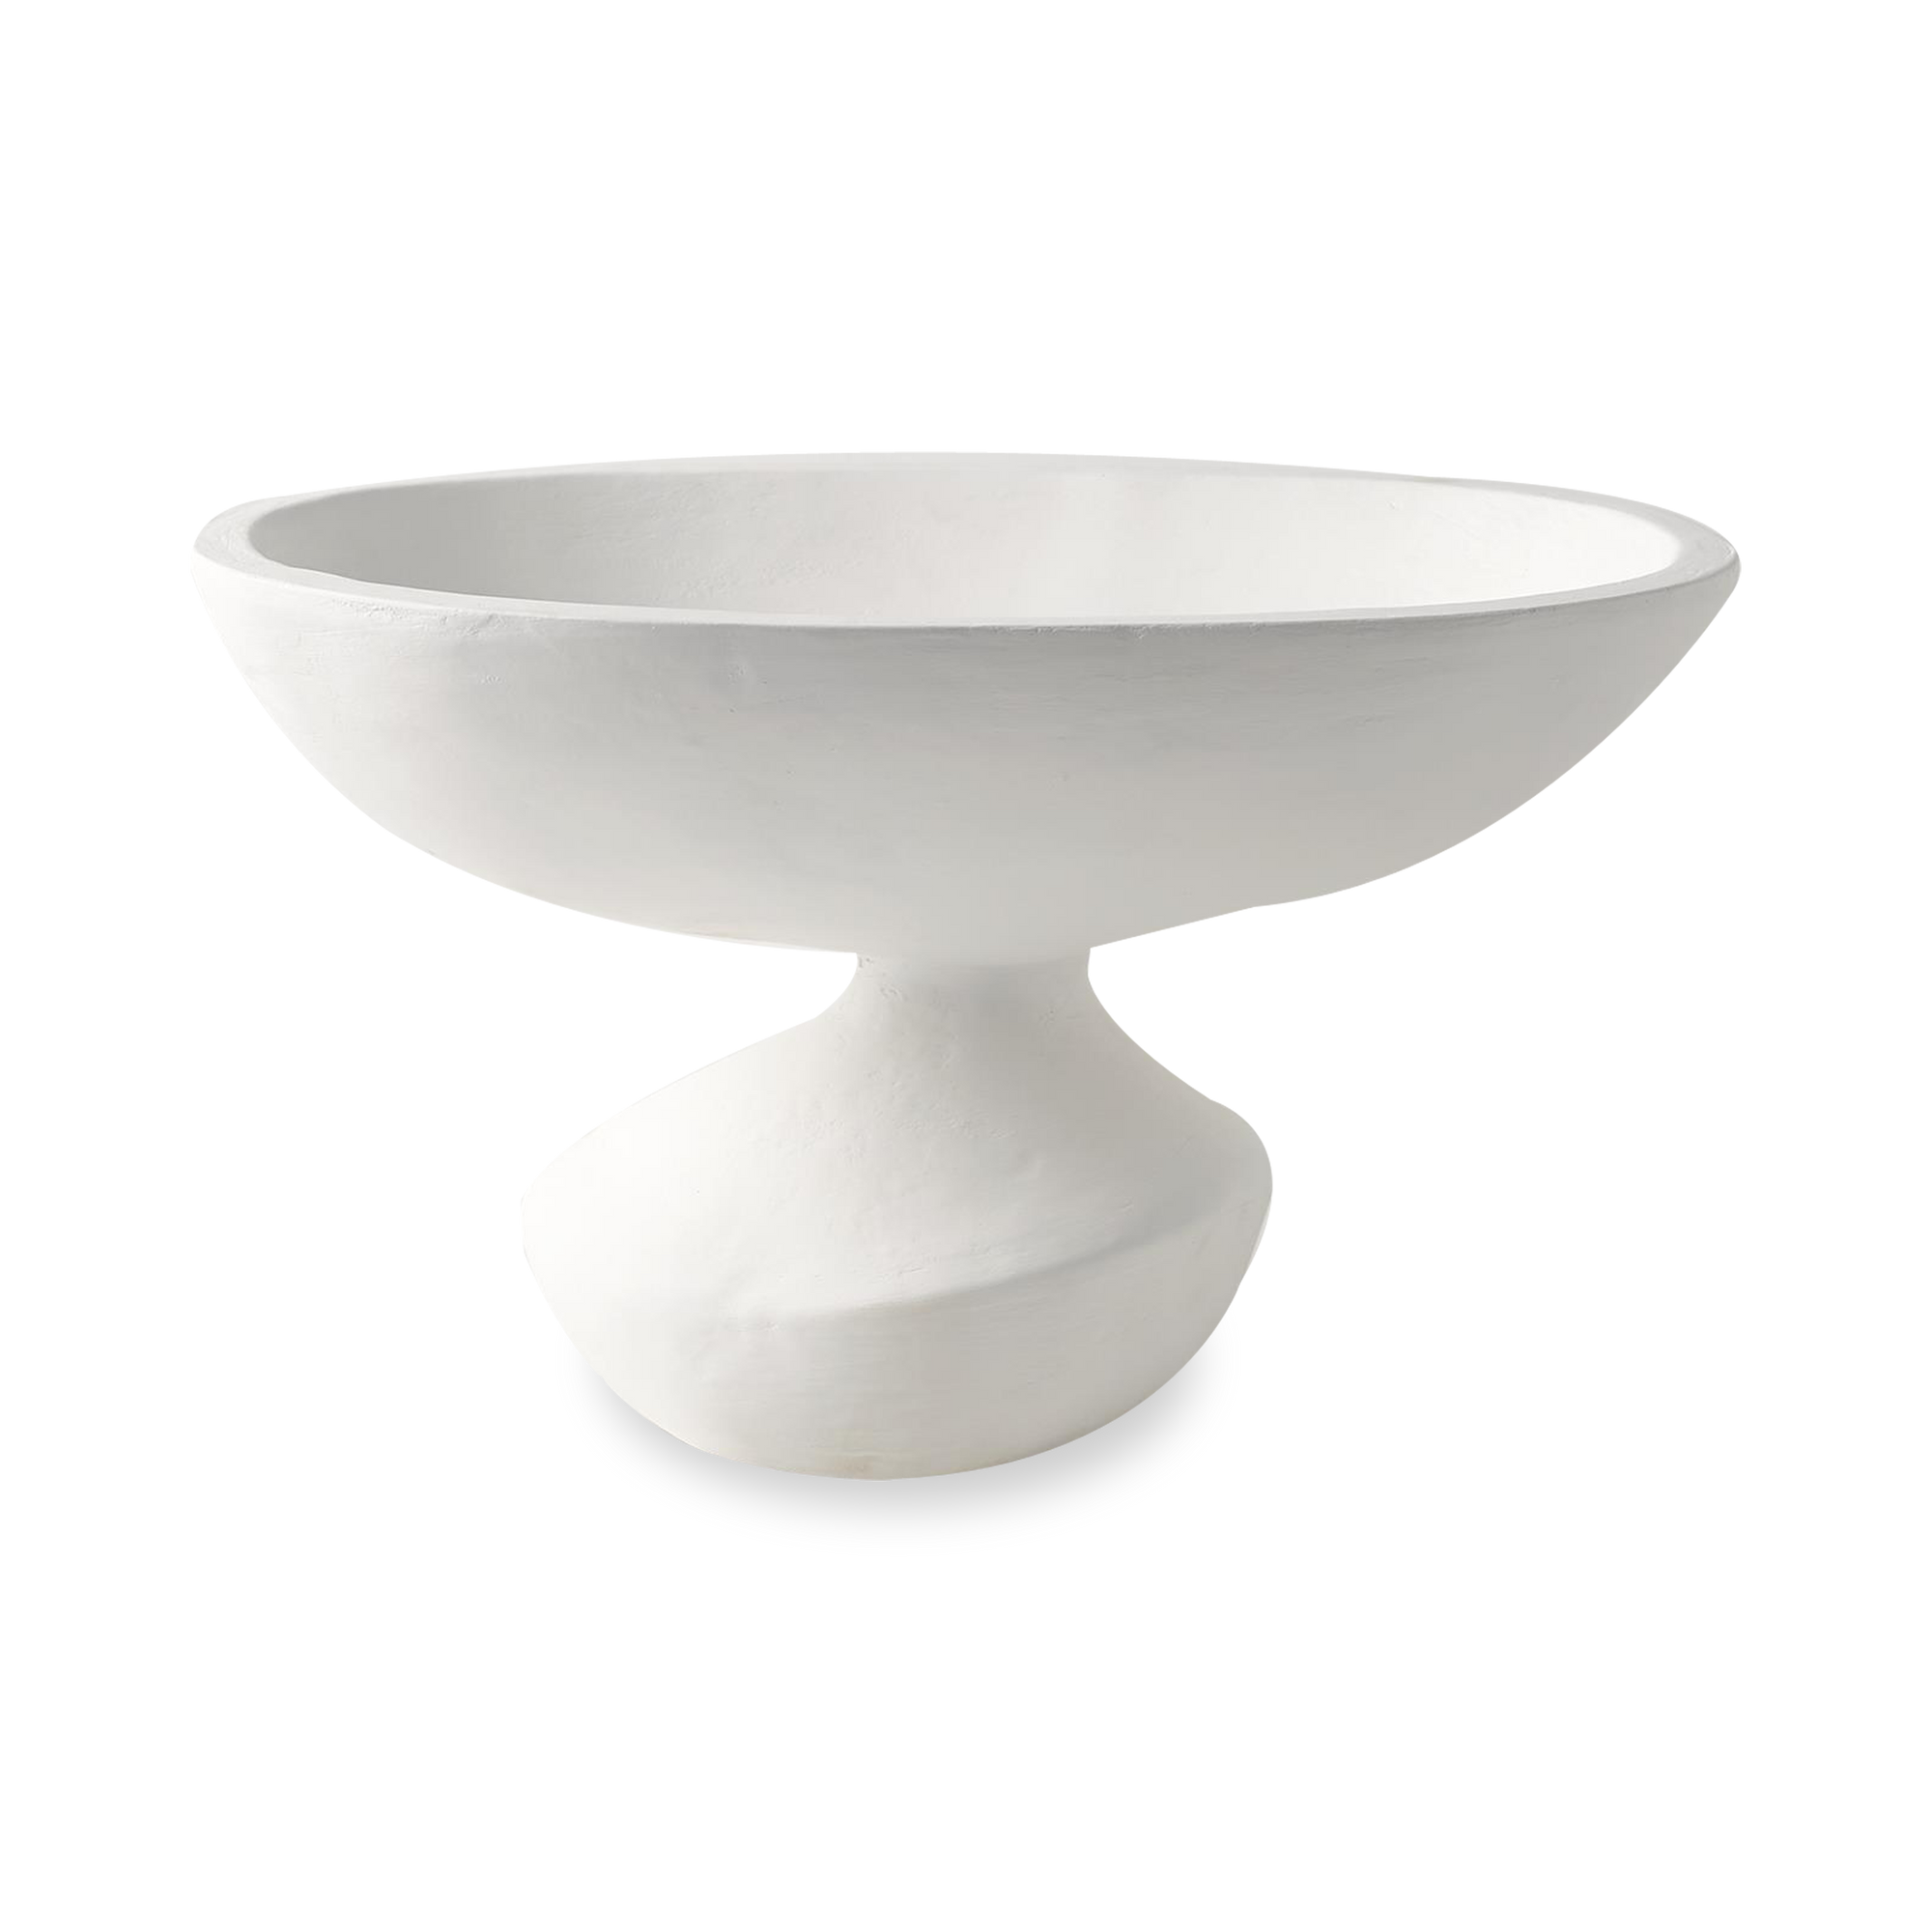 The Sculptured Organic Bowl is inspired by the sculpture of Arps.